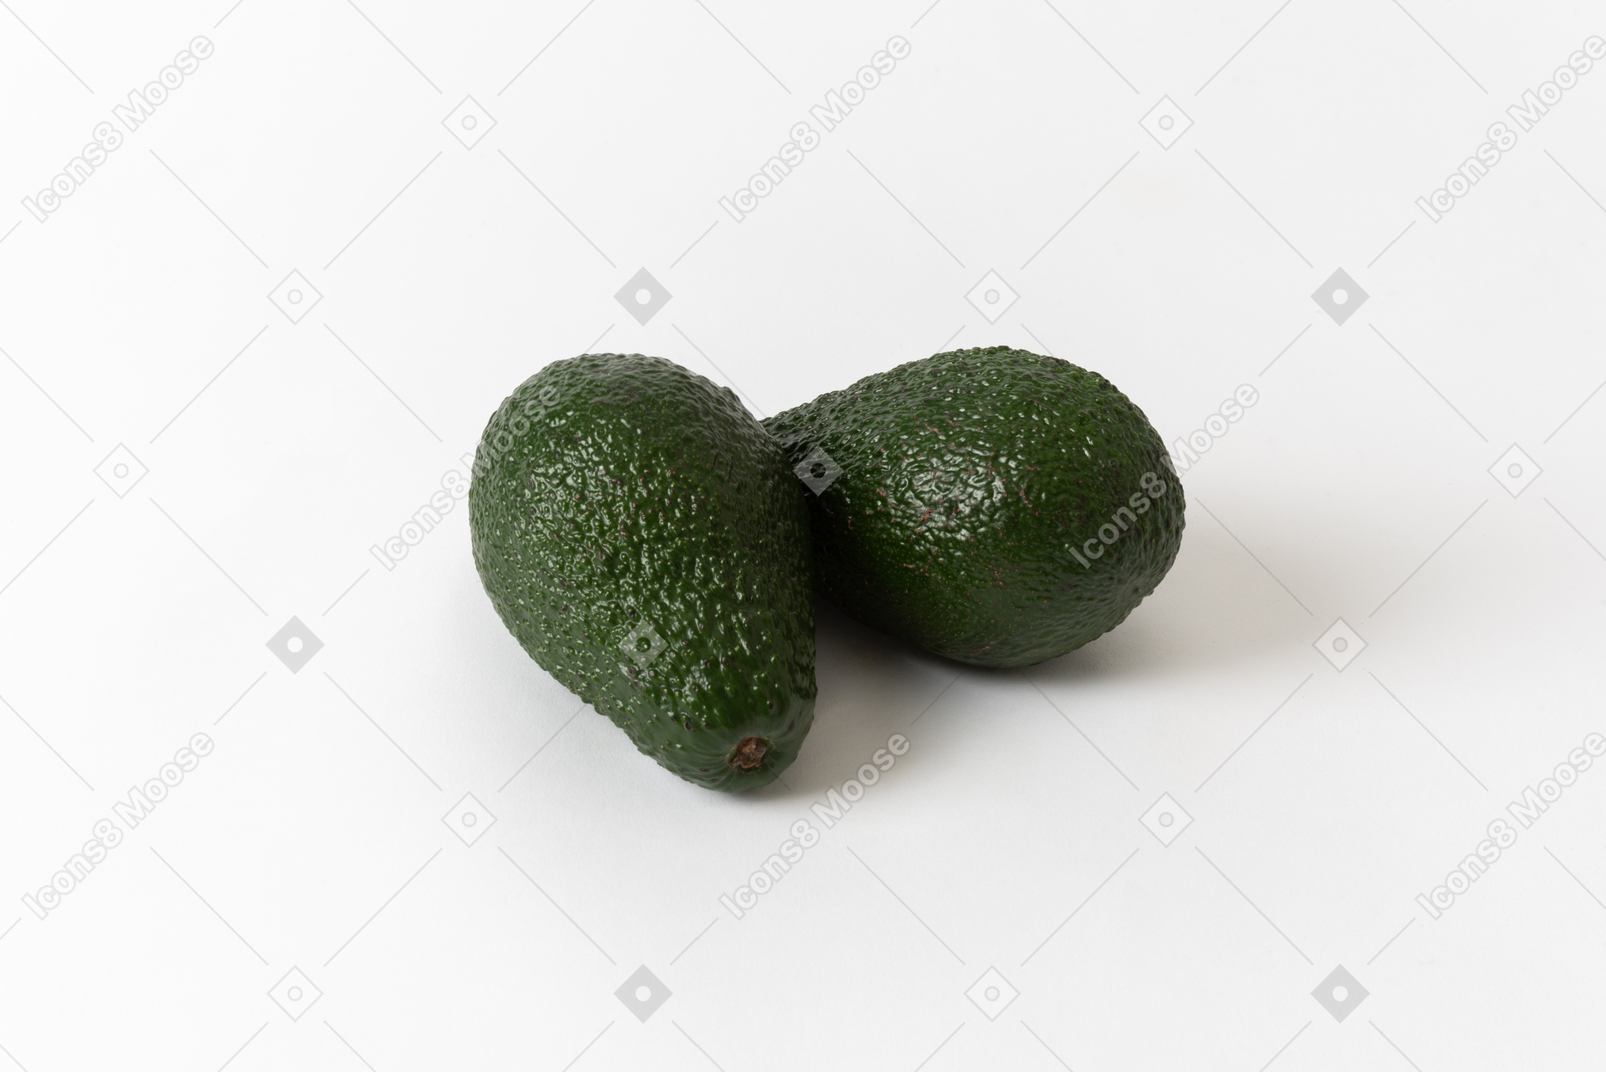 Avocado is quite a vegetable to taste